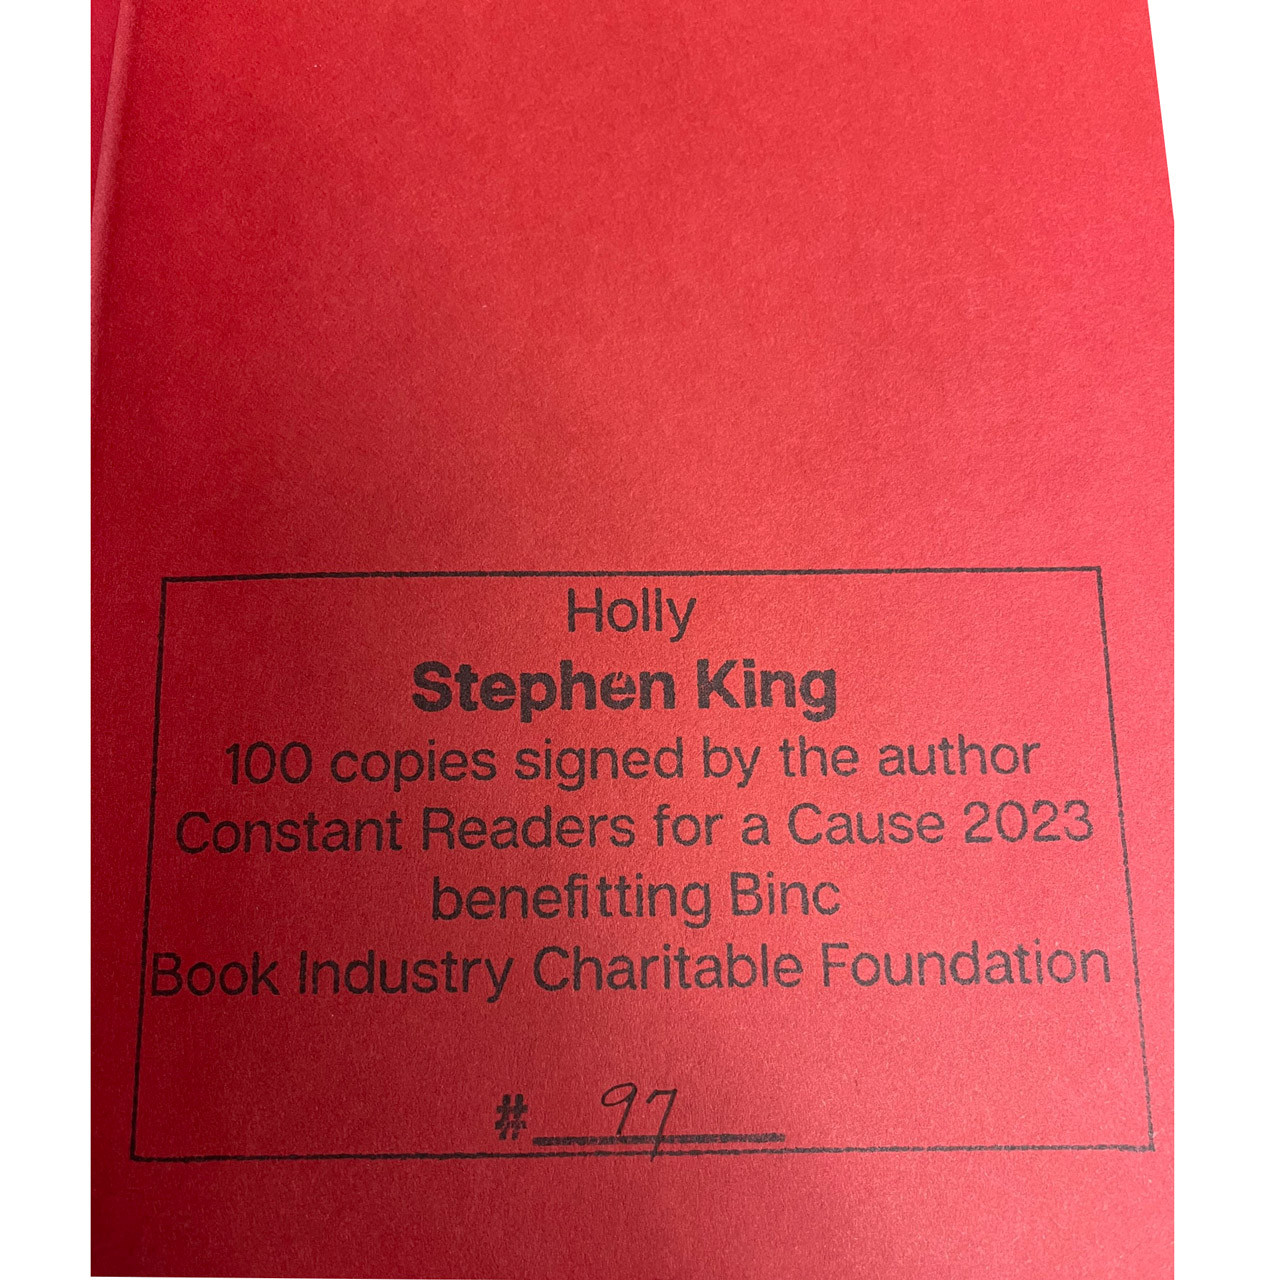 Stephen King "Holly" Traycased Signed First Edition, First Printing, Limited No. 97 /100 [Very Fine]